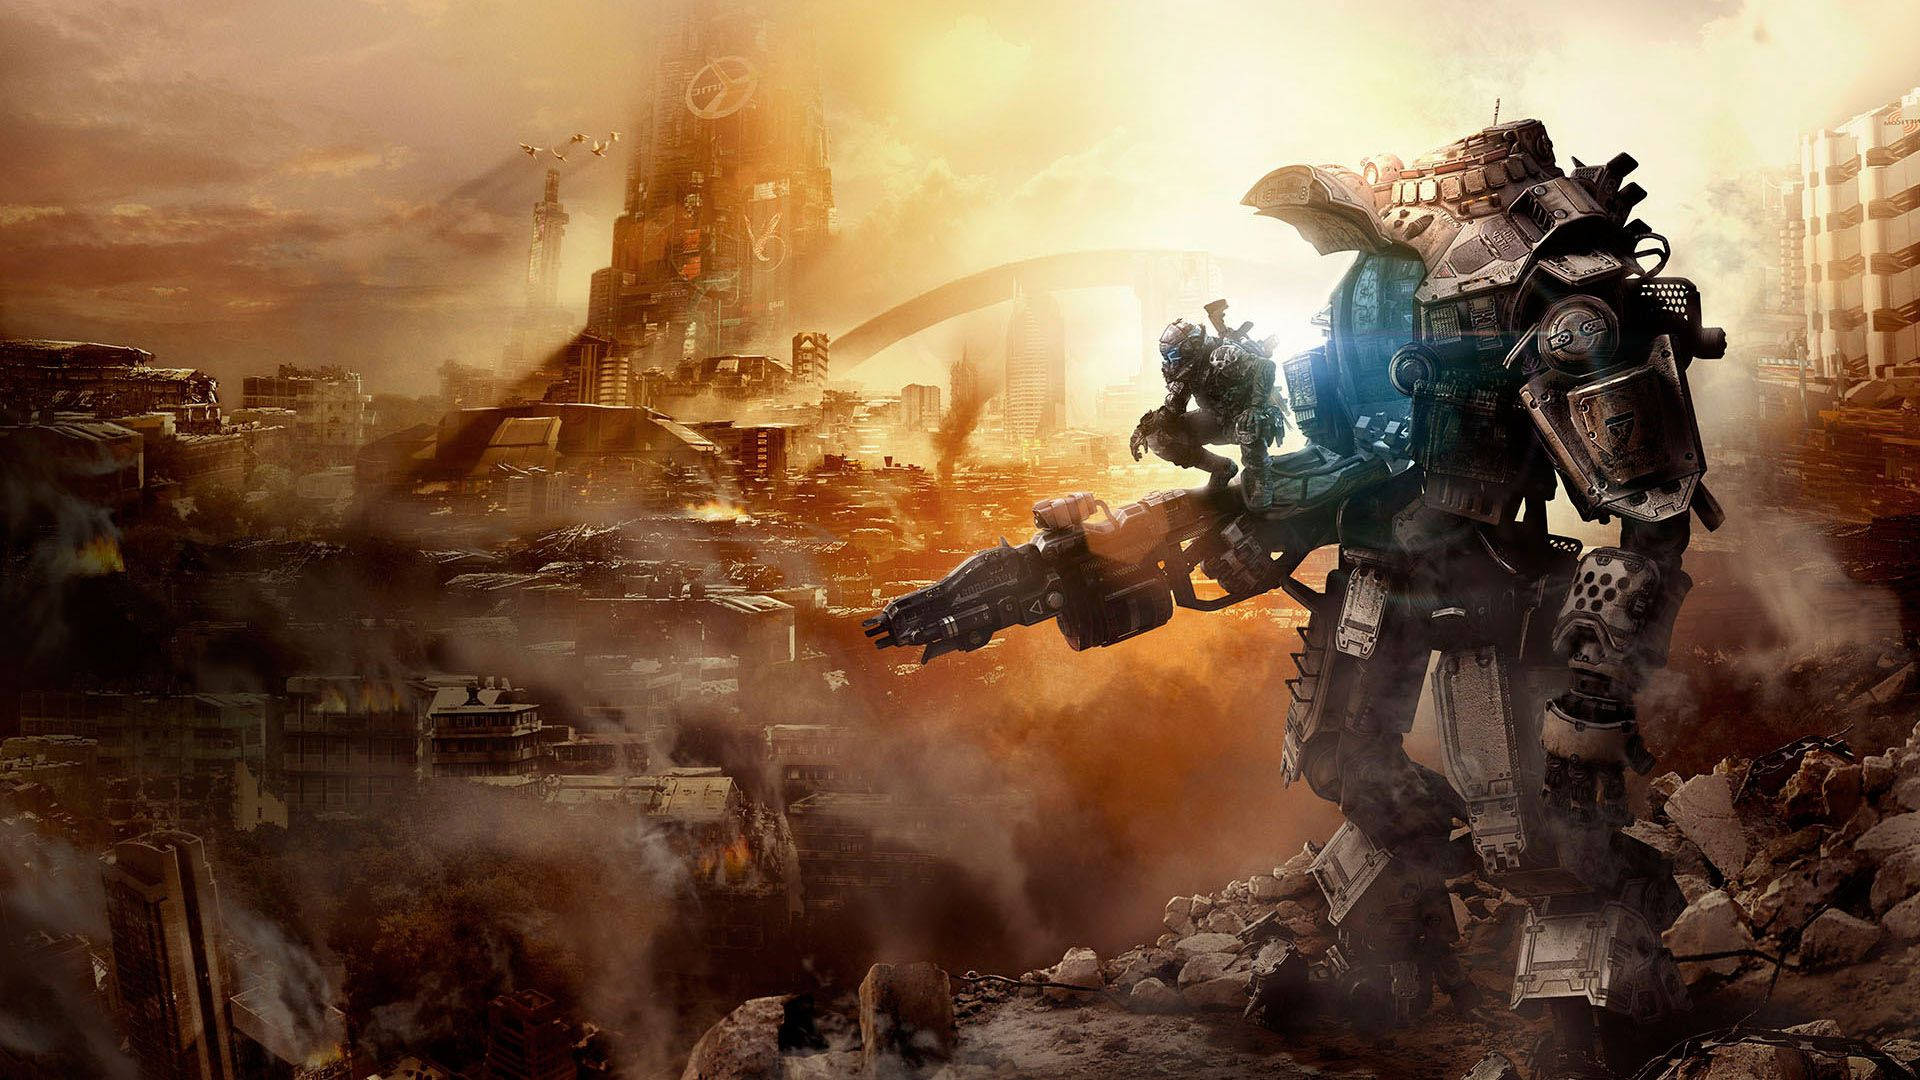 A Titan watches over the Doomed City in Titanfall 2 Wallpaper